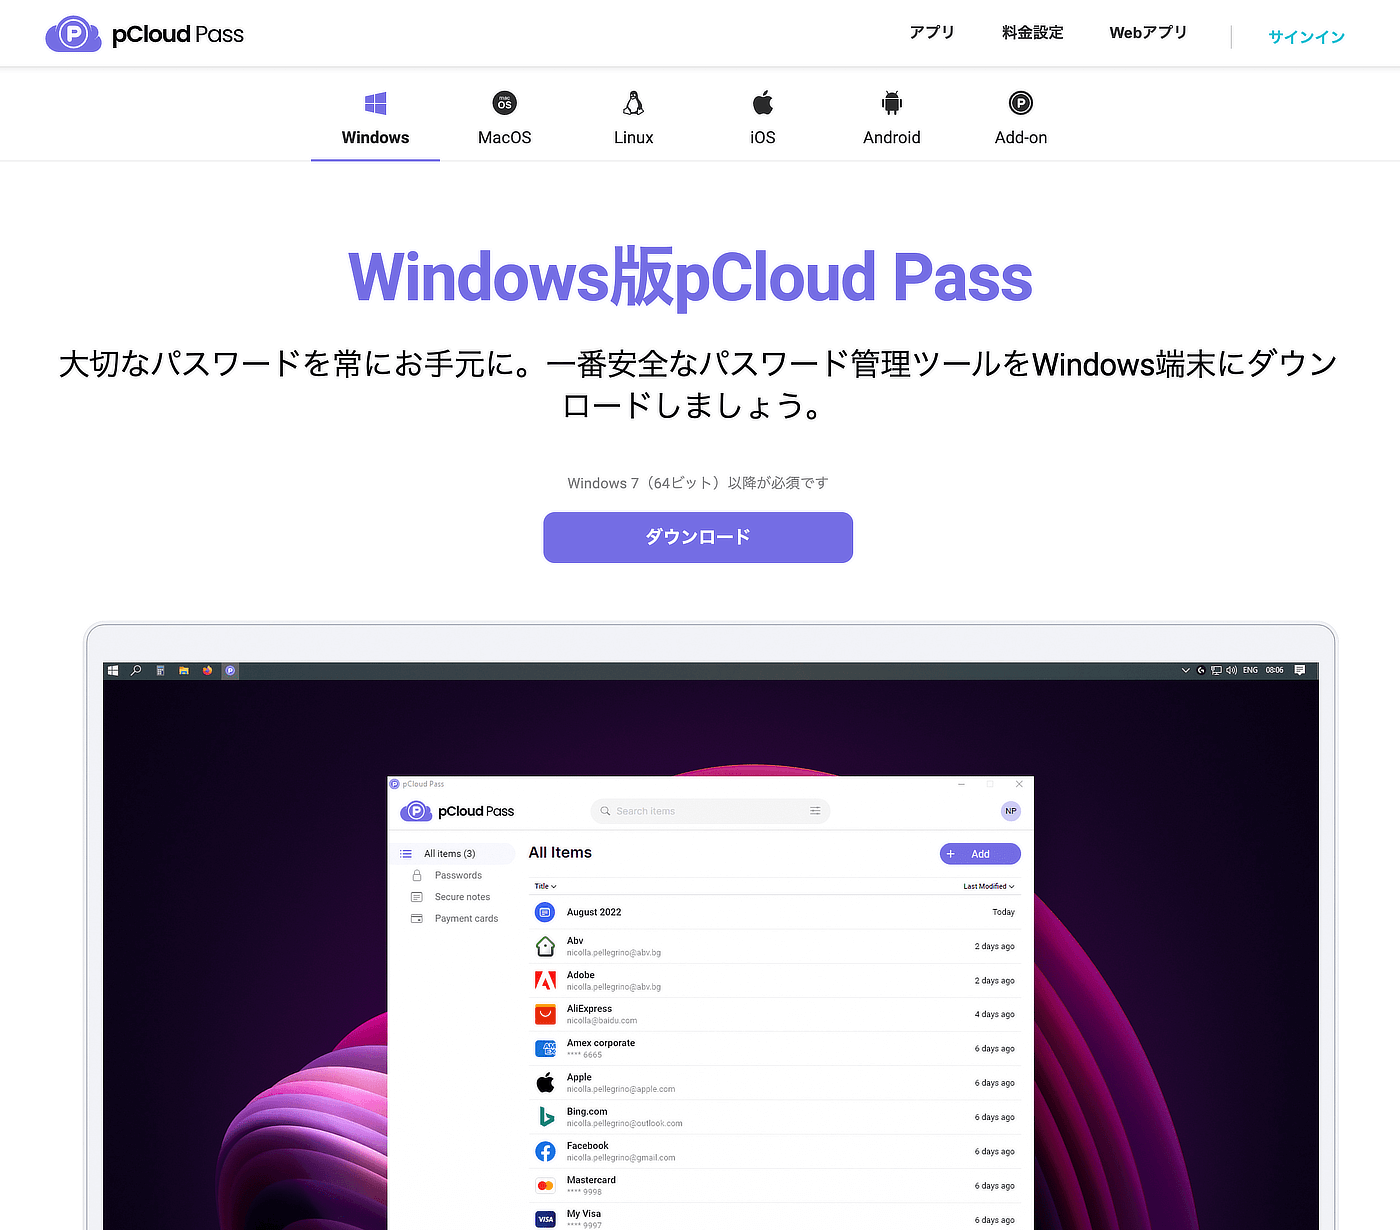 pCloud Pass アプリ 